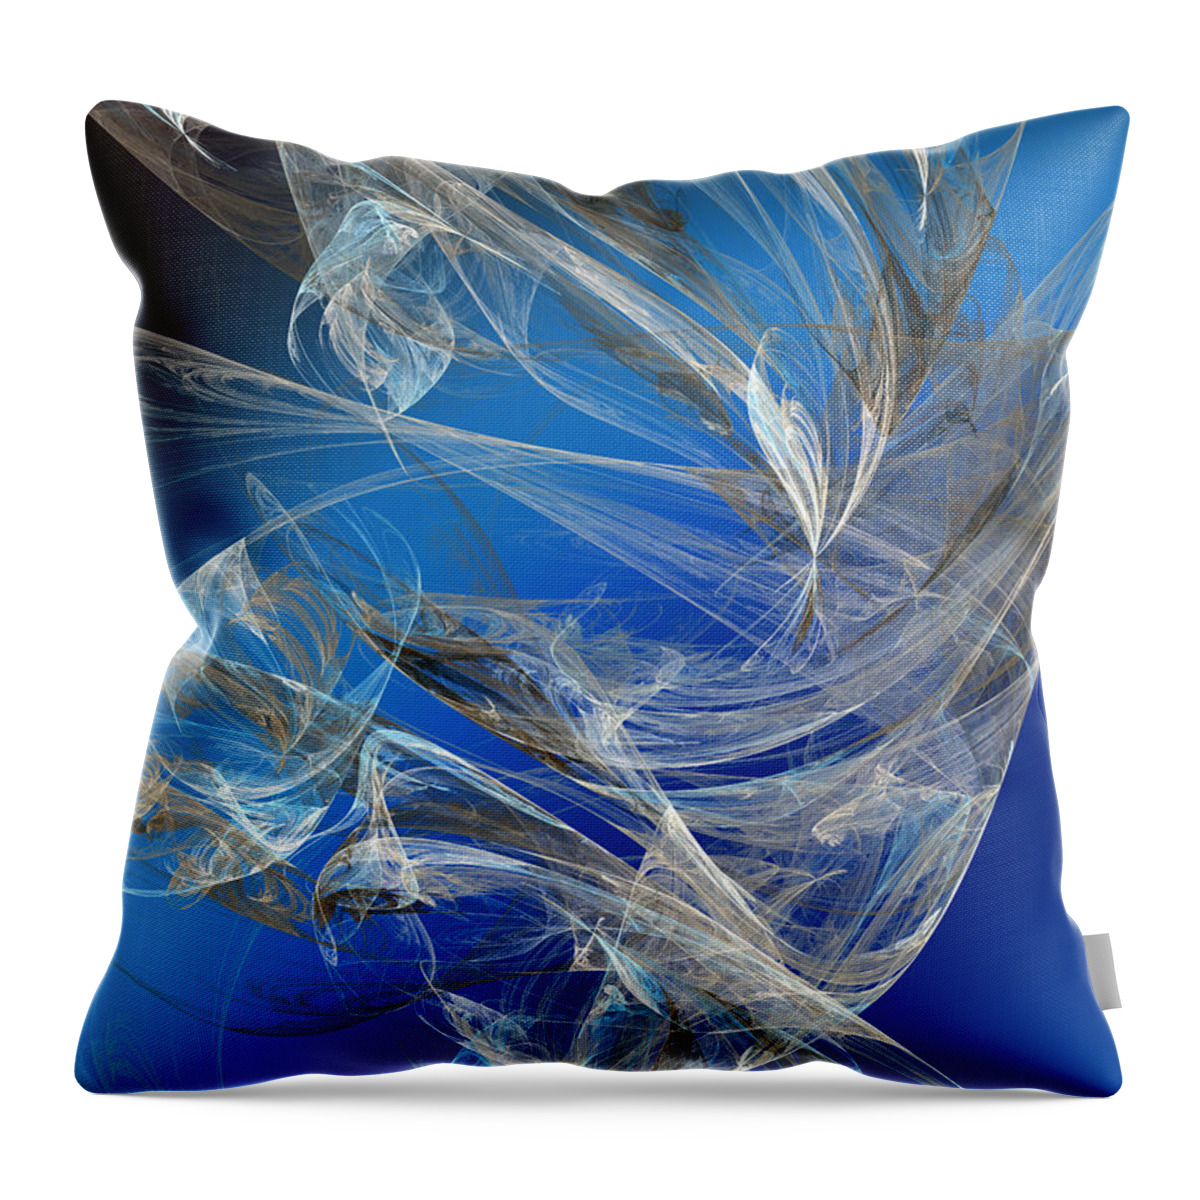 Fine Art Throw Pillow featuring the digital art Blue Legacy by Andee Design